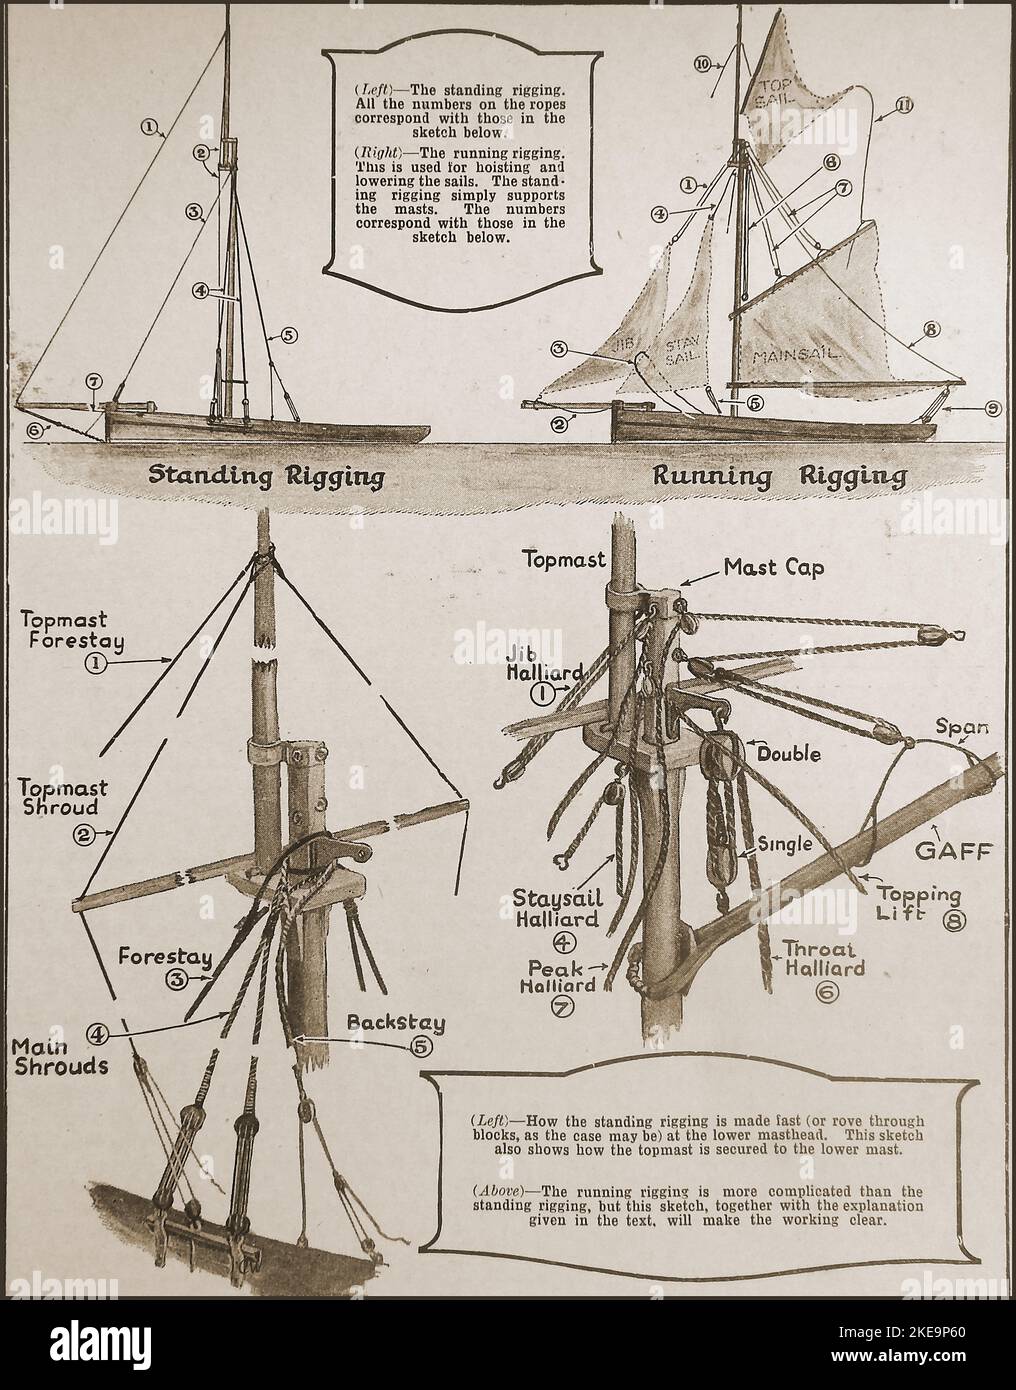 A 1930's shipping chart describing the differences between Standing Rigging and Running Rigging. Stock Photo